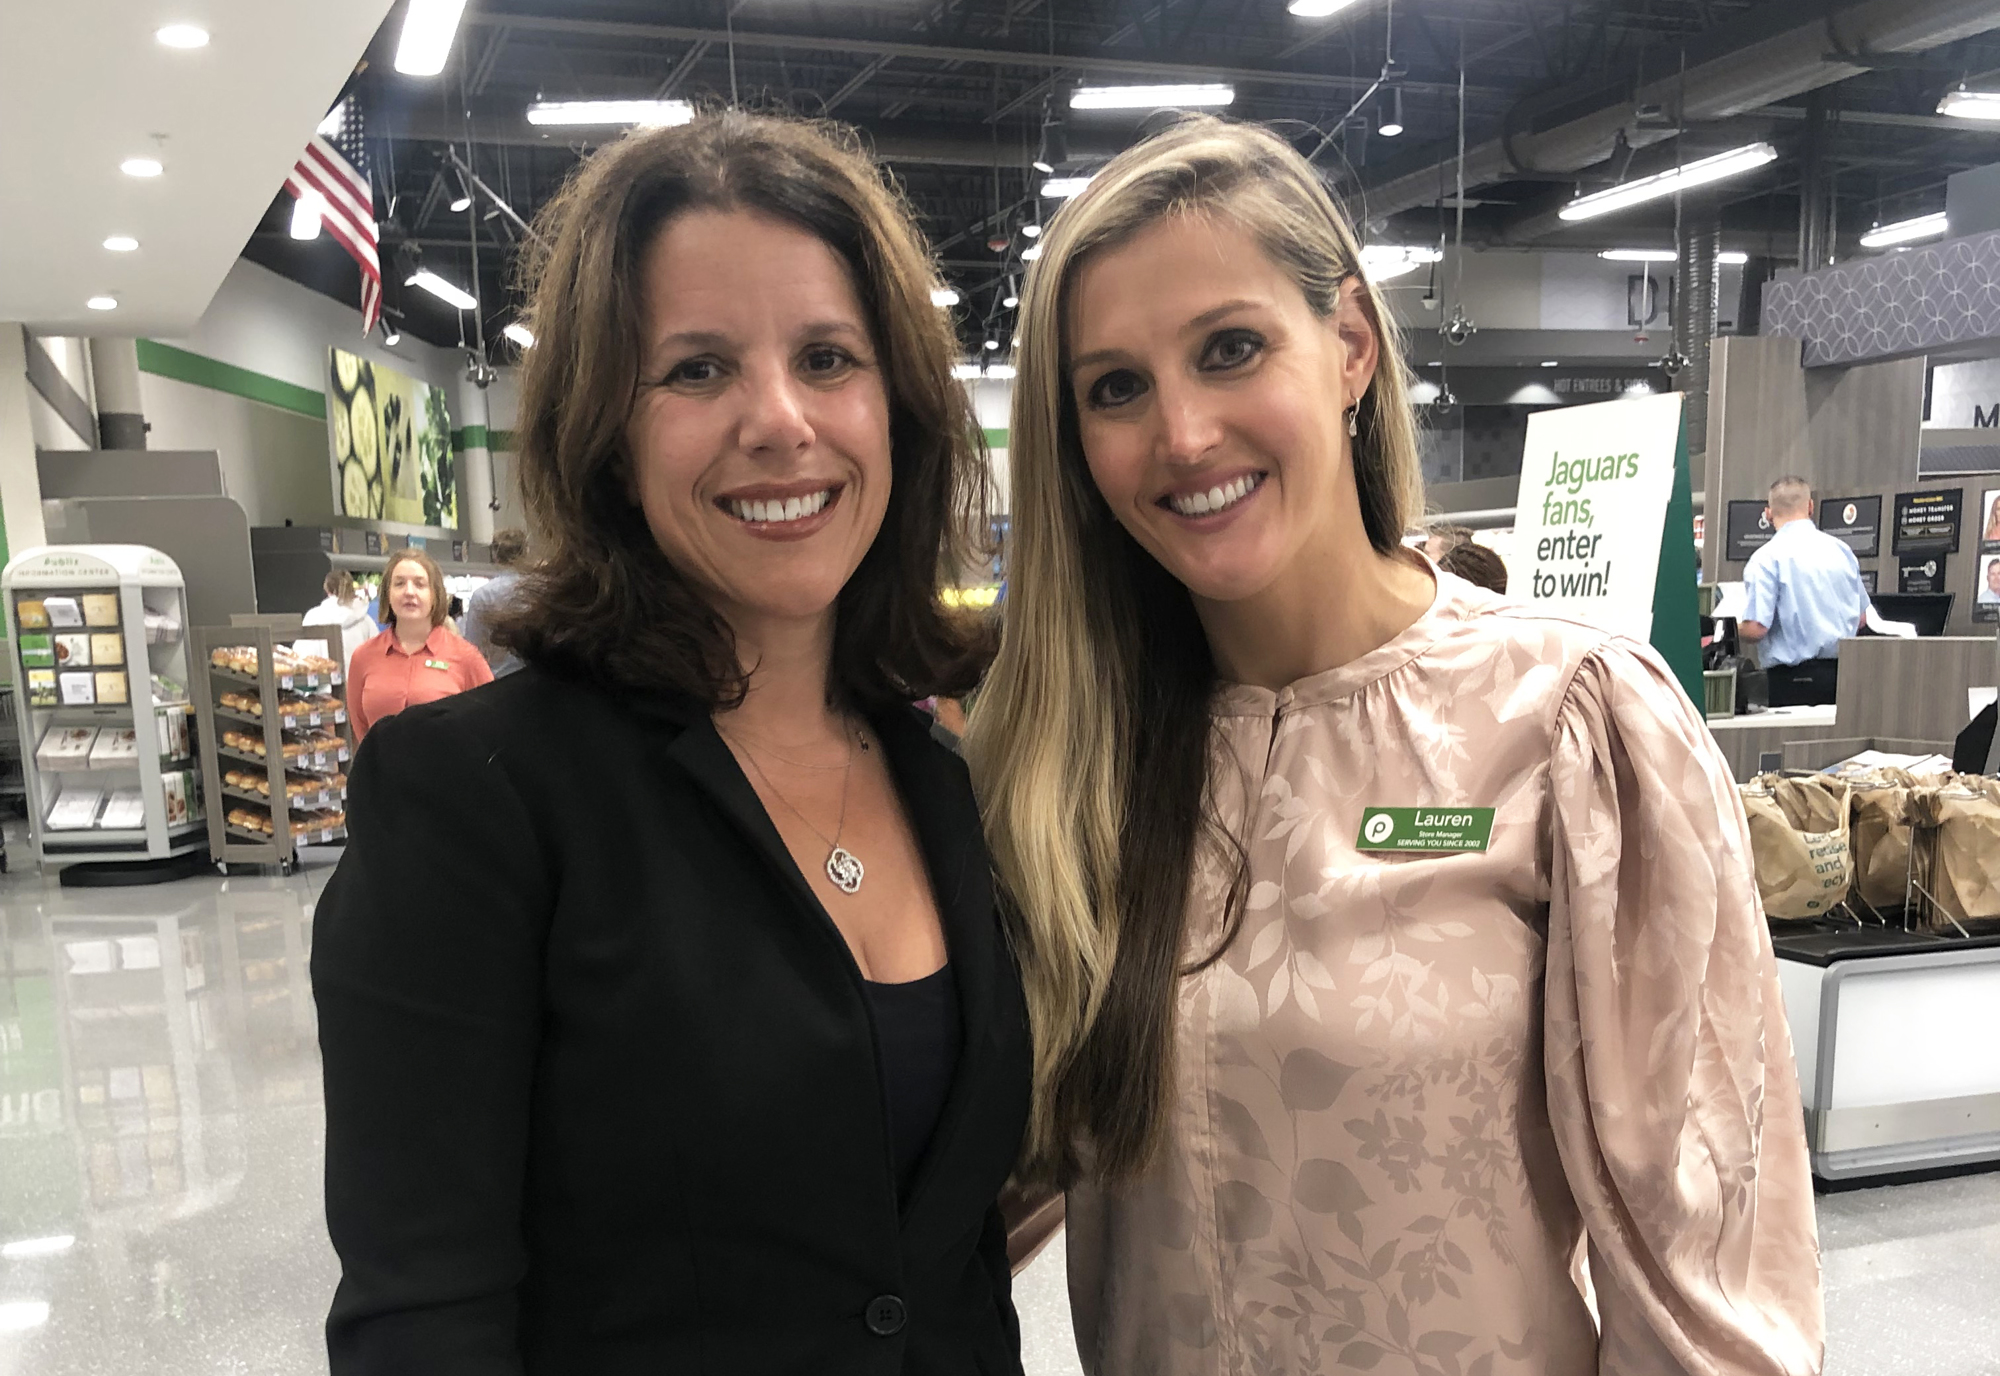 District 5 City Council member LeAnna Cumber and Publix Store Manager Lauren Hindery.